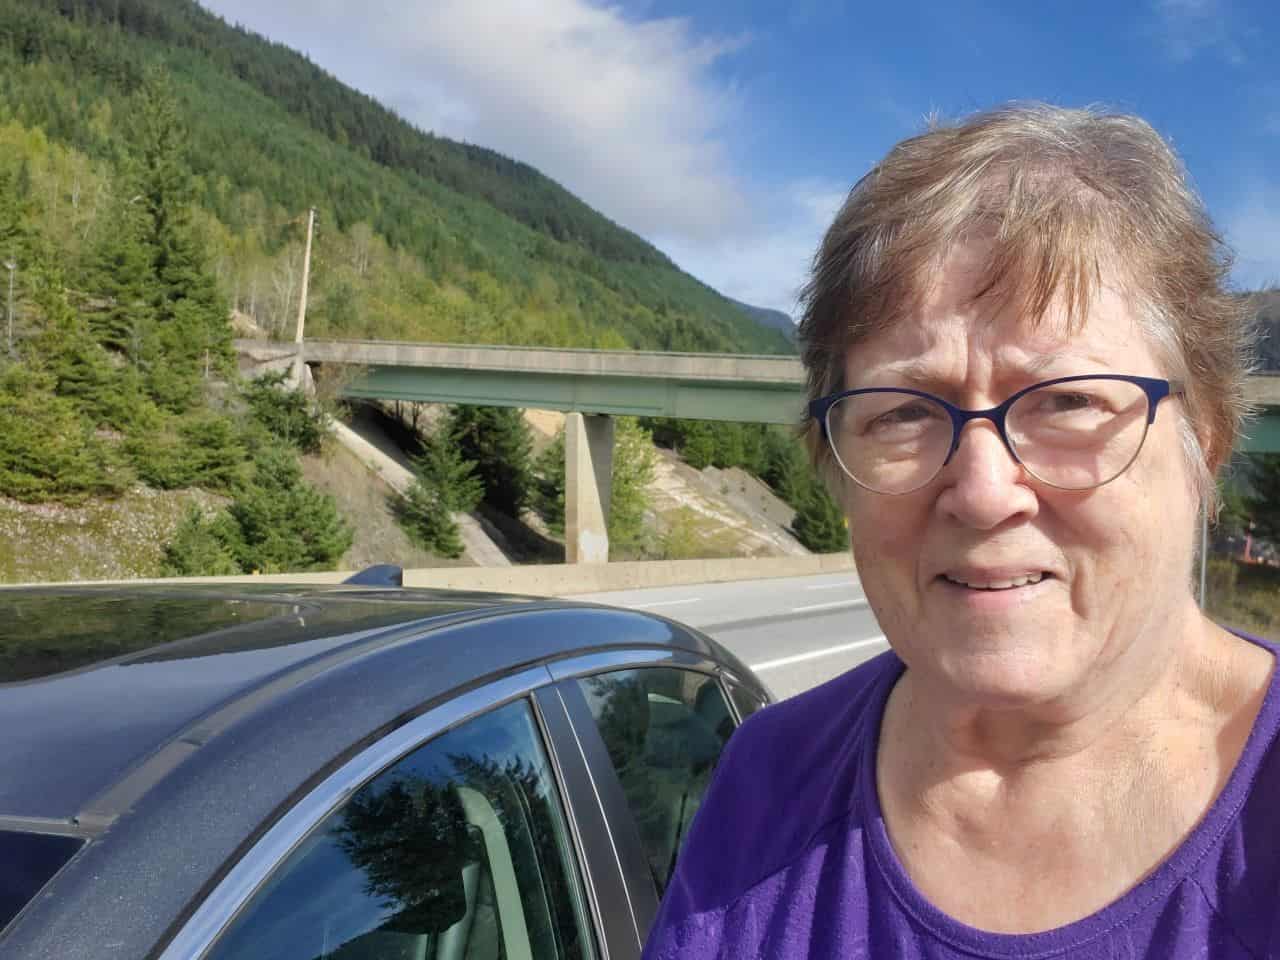 Take many photos along the Coquihalla Hwy. Scenic drive in British Columbia. Connects Hope and Merritt BC.